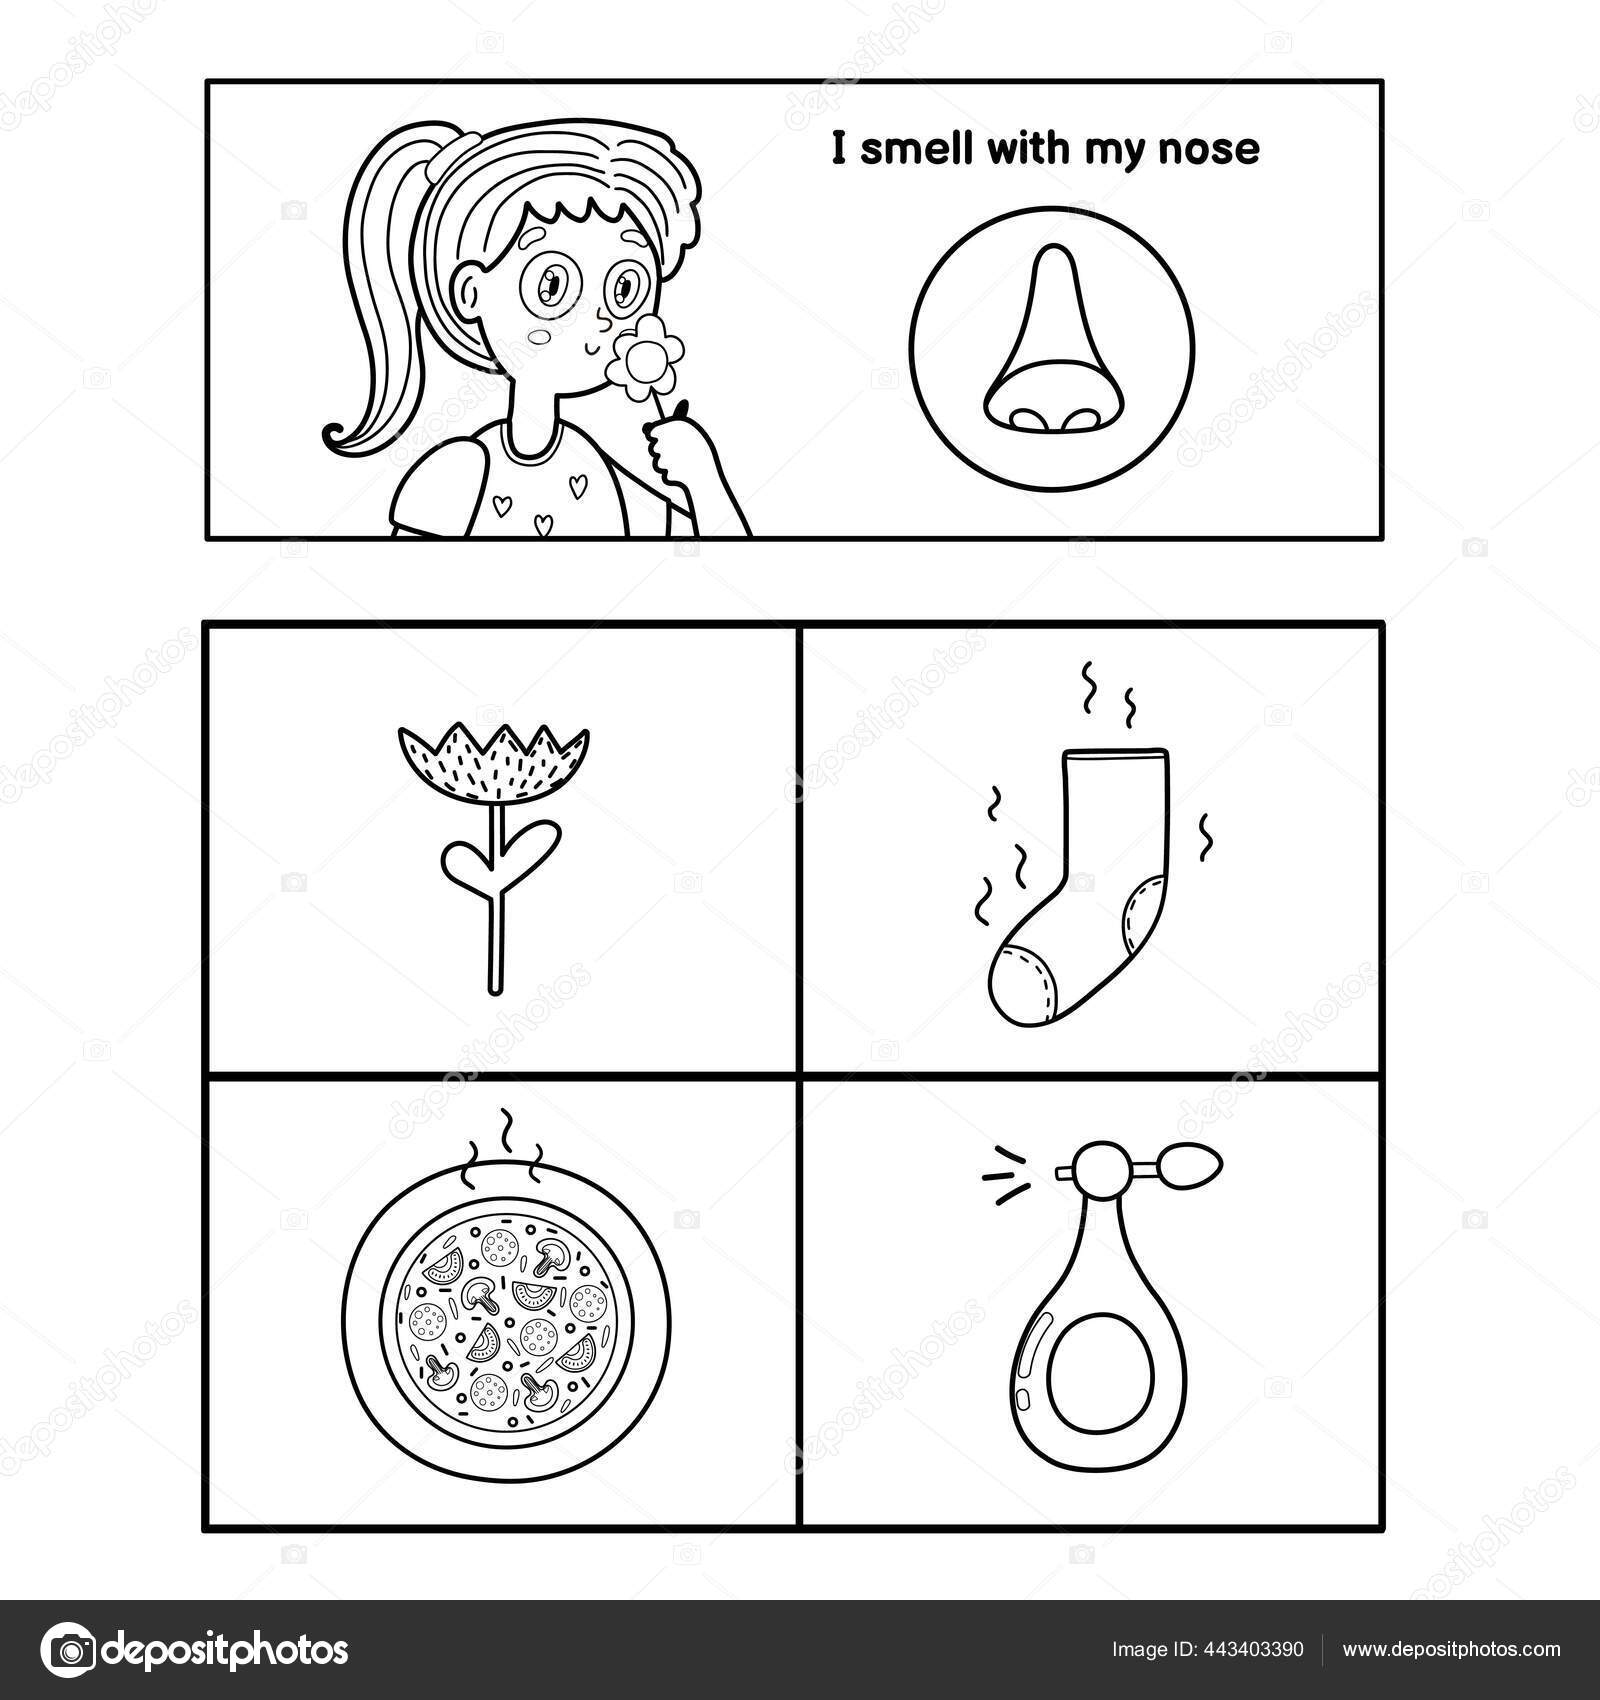 the five senses coloring pages